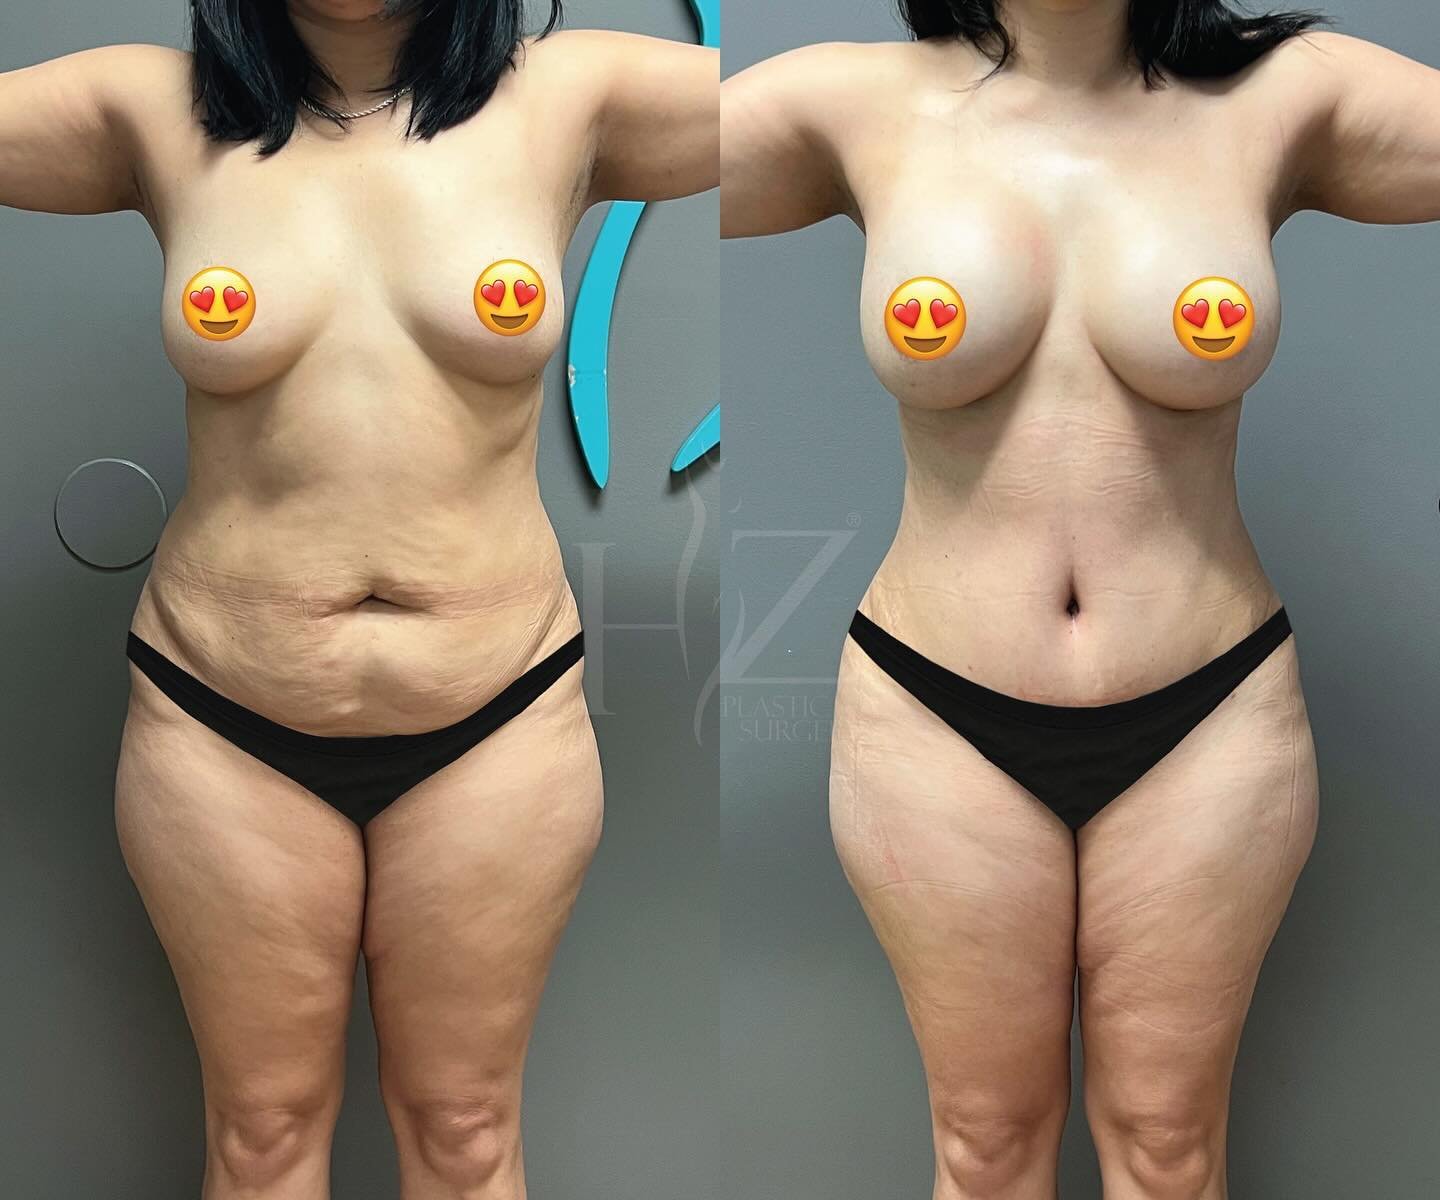 Our latest mommy makeovers 🔥 

1: Tummy tuck, breast augmentation, and liposuction on the waist and back bra roll by @drafsharihzps at 6 weeks post-op
2: Tummy tuck, liposuction on waist/back bra roll/front bra roll, and breast reduction by @drlylyh